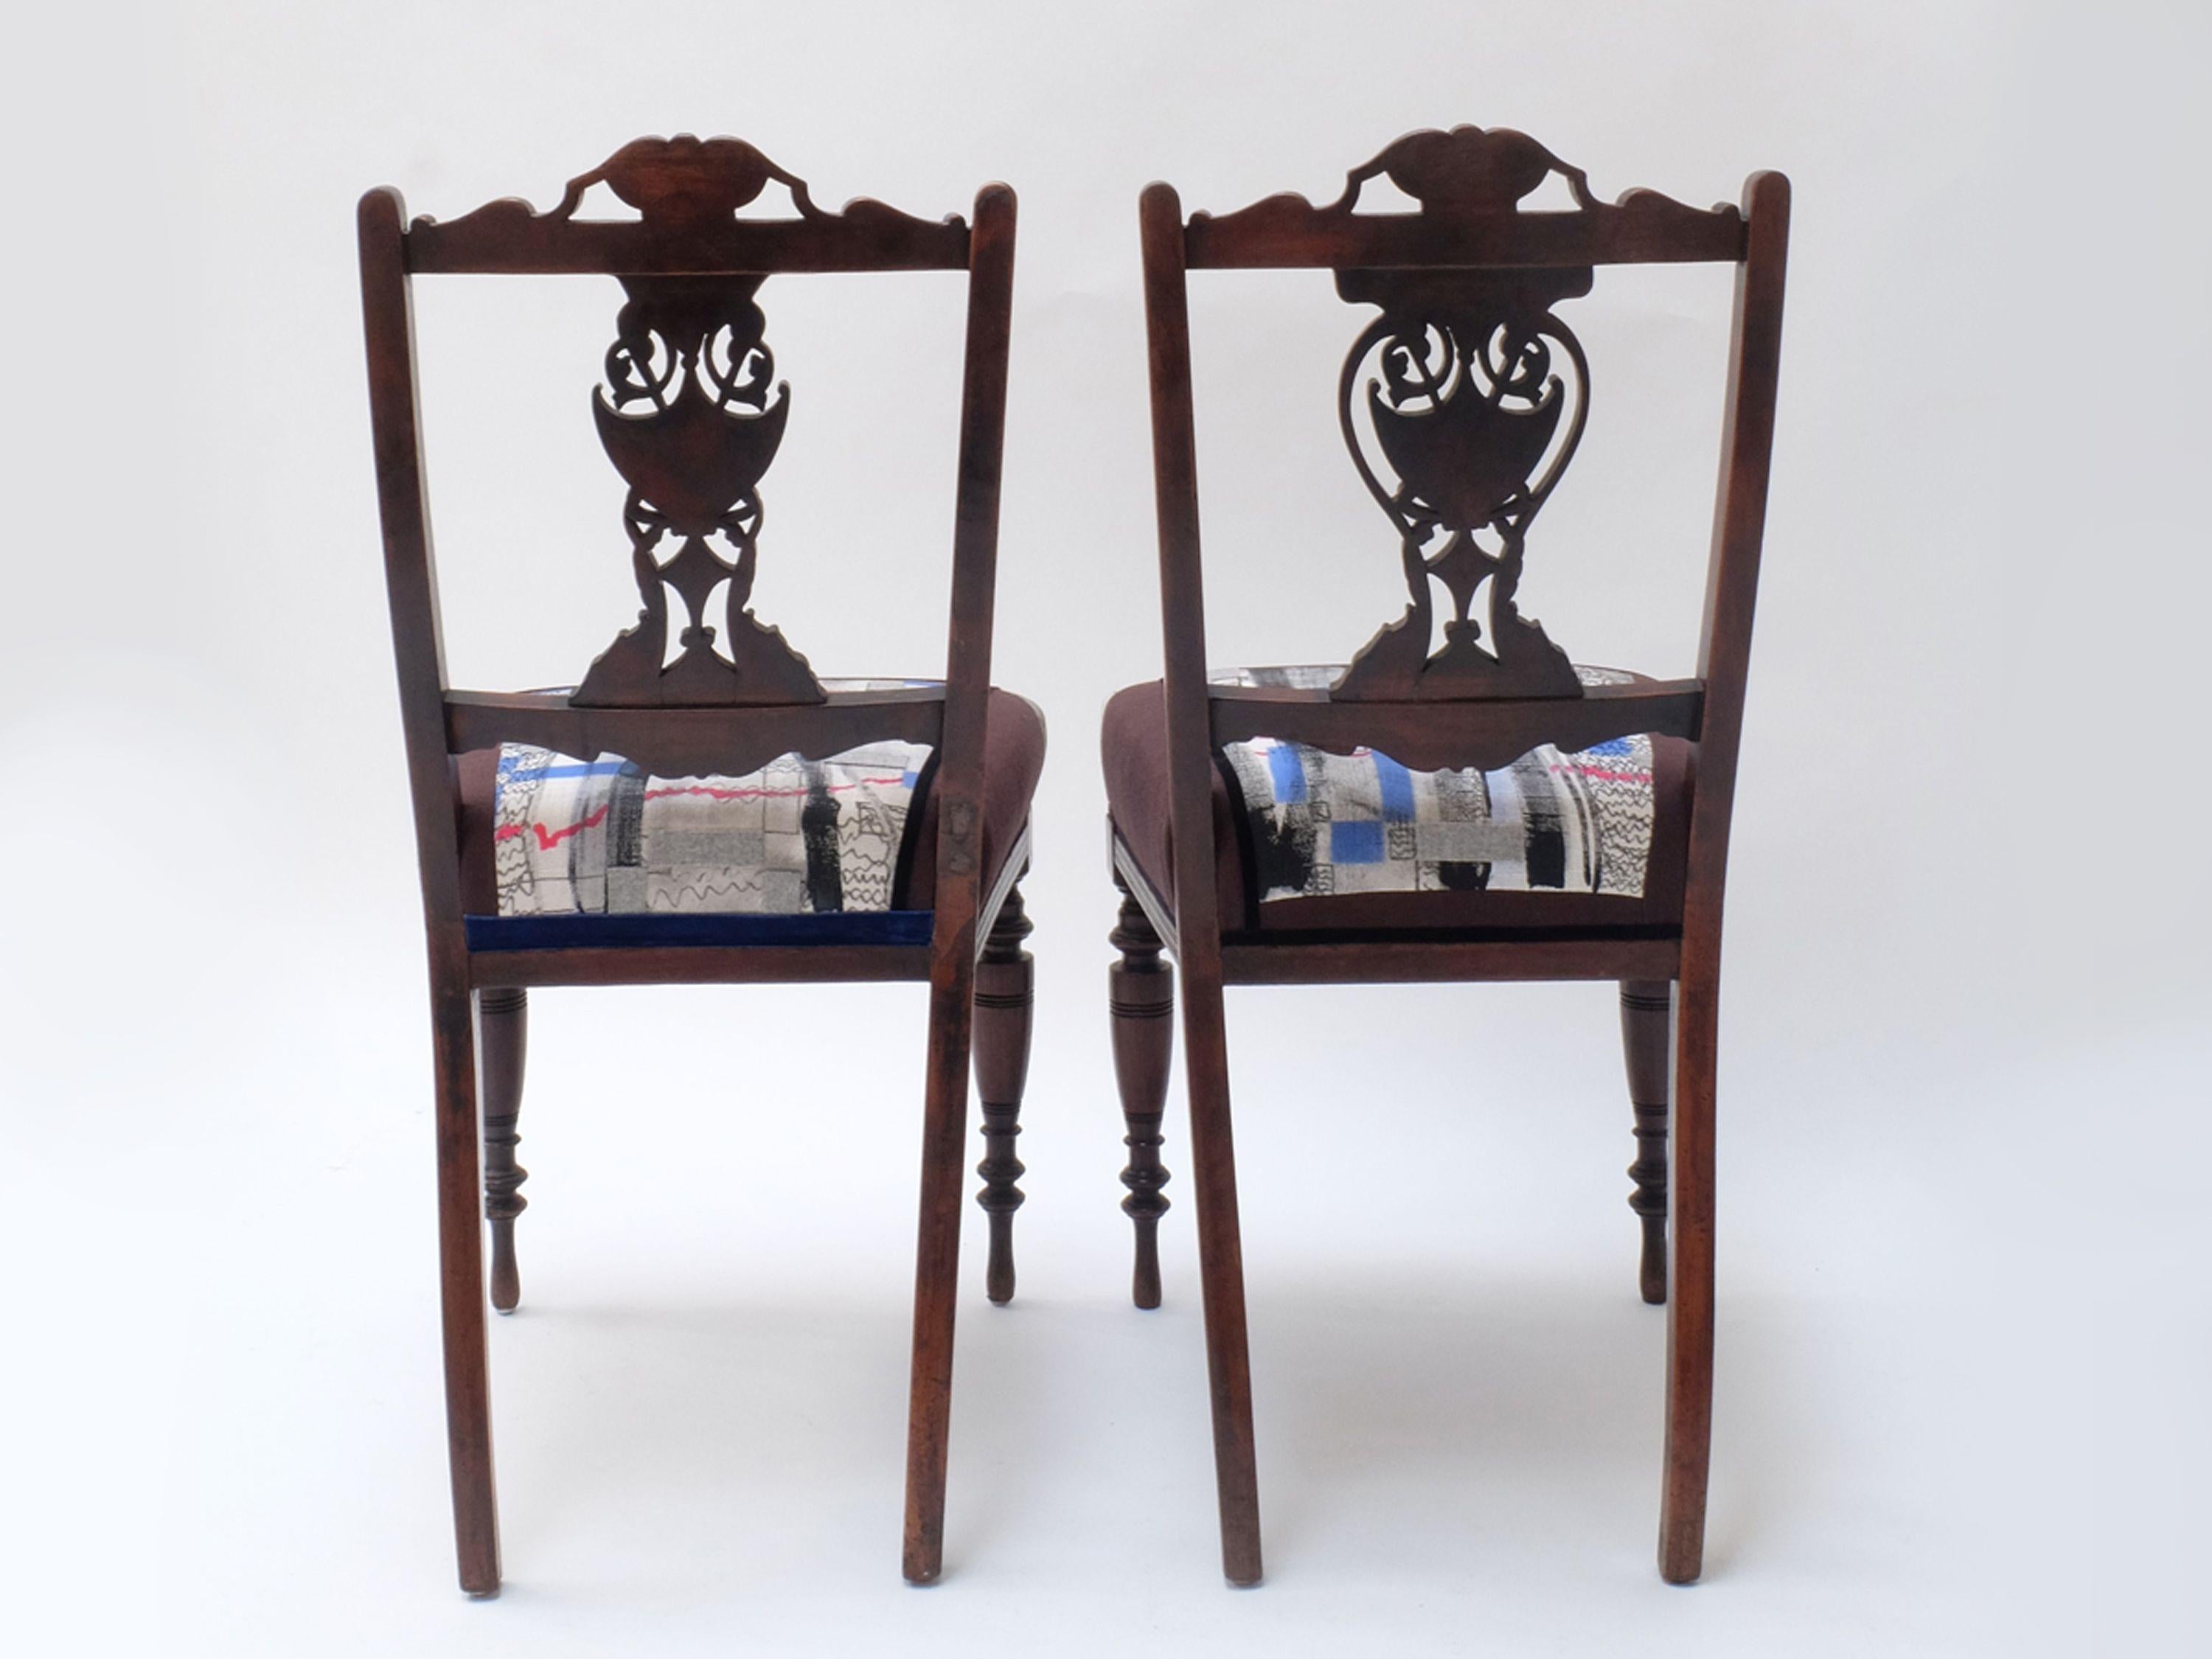 One-Of-A-Kind side chairs. 
Abstract contemporary collage artwork (mixed media) applied onto carefully restored and re-upholstered antique Edwardian side chairs.
Materials: Collage Artwork (mixed media), premium 100% upholstery wool felt, satin and